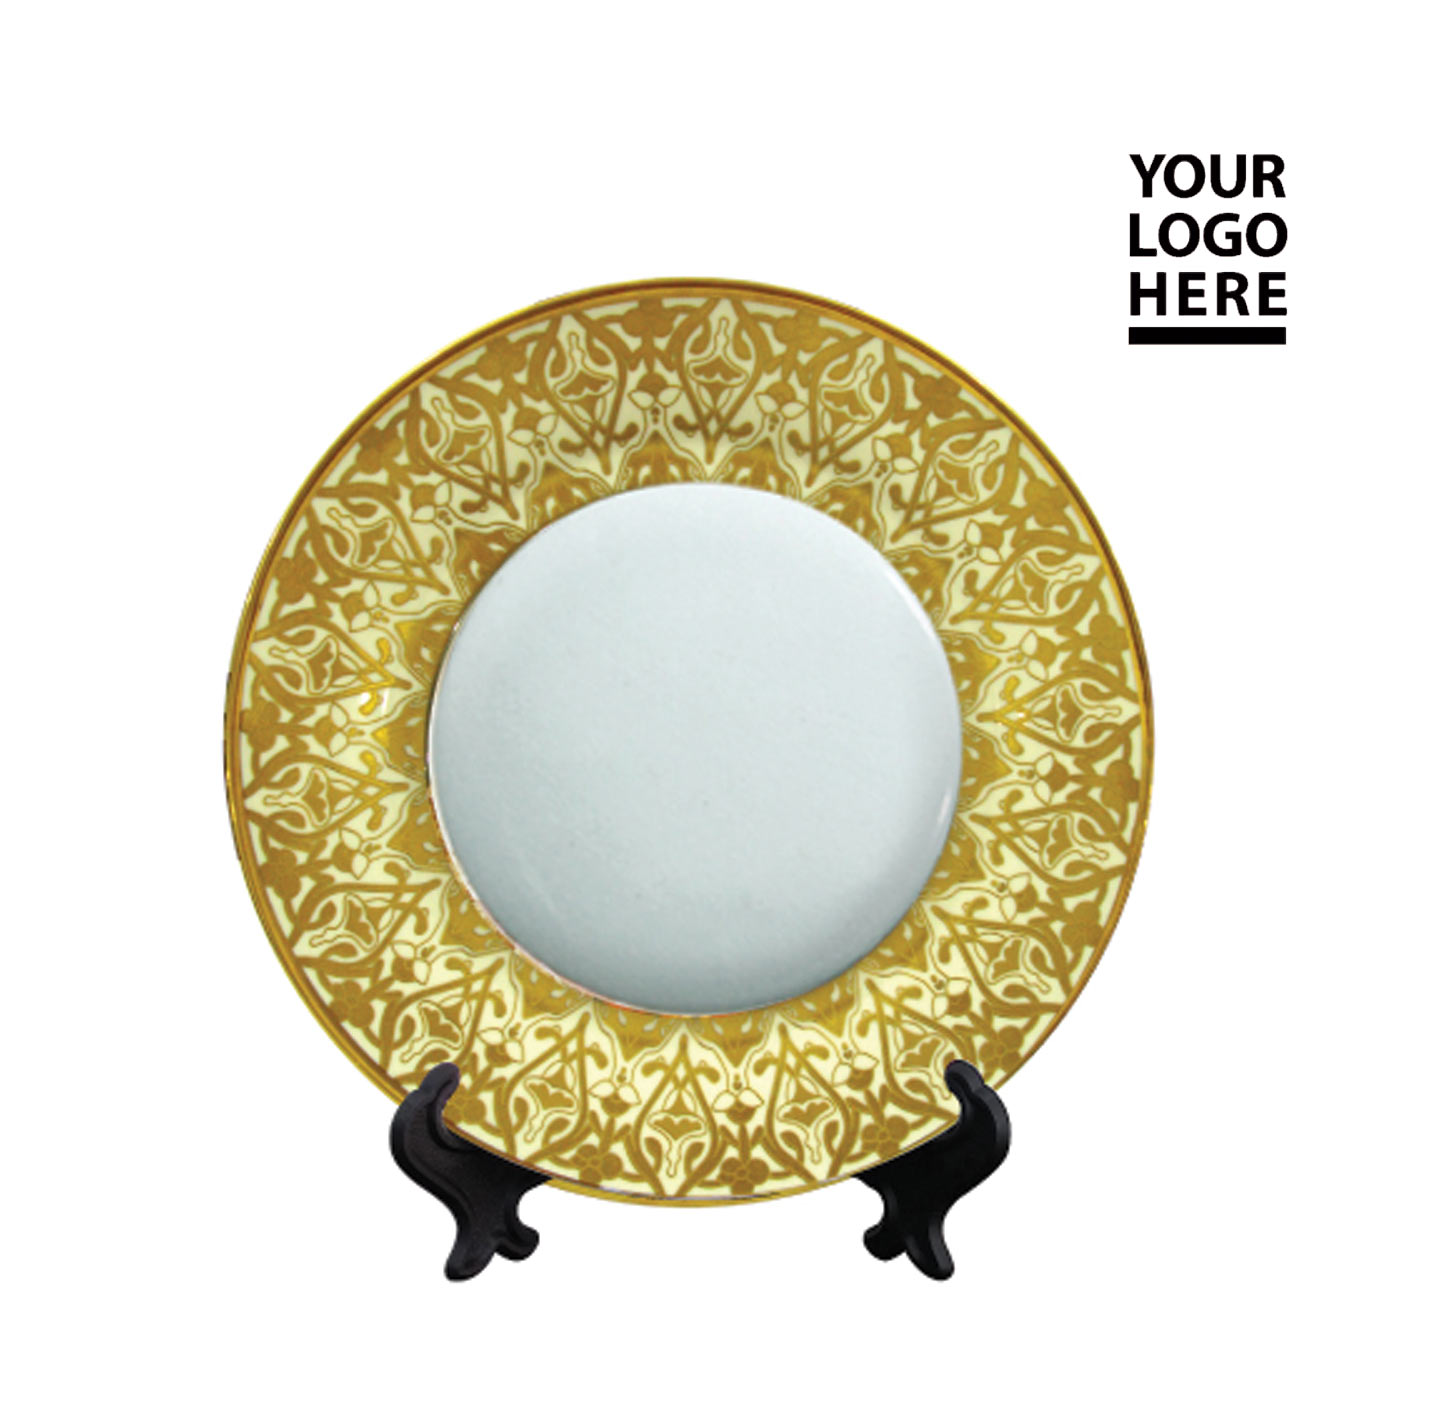 Personalize Ceramic Plate golden and silver color